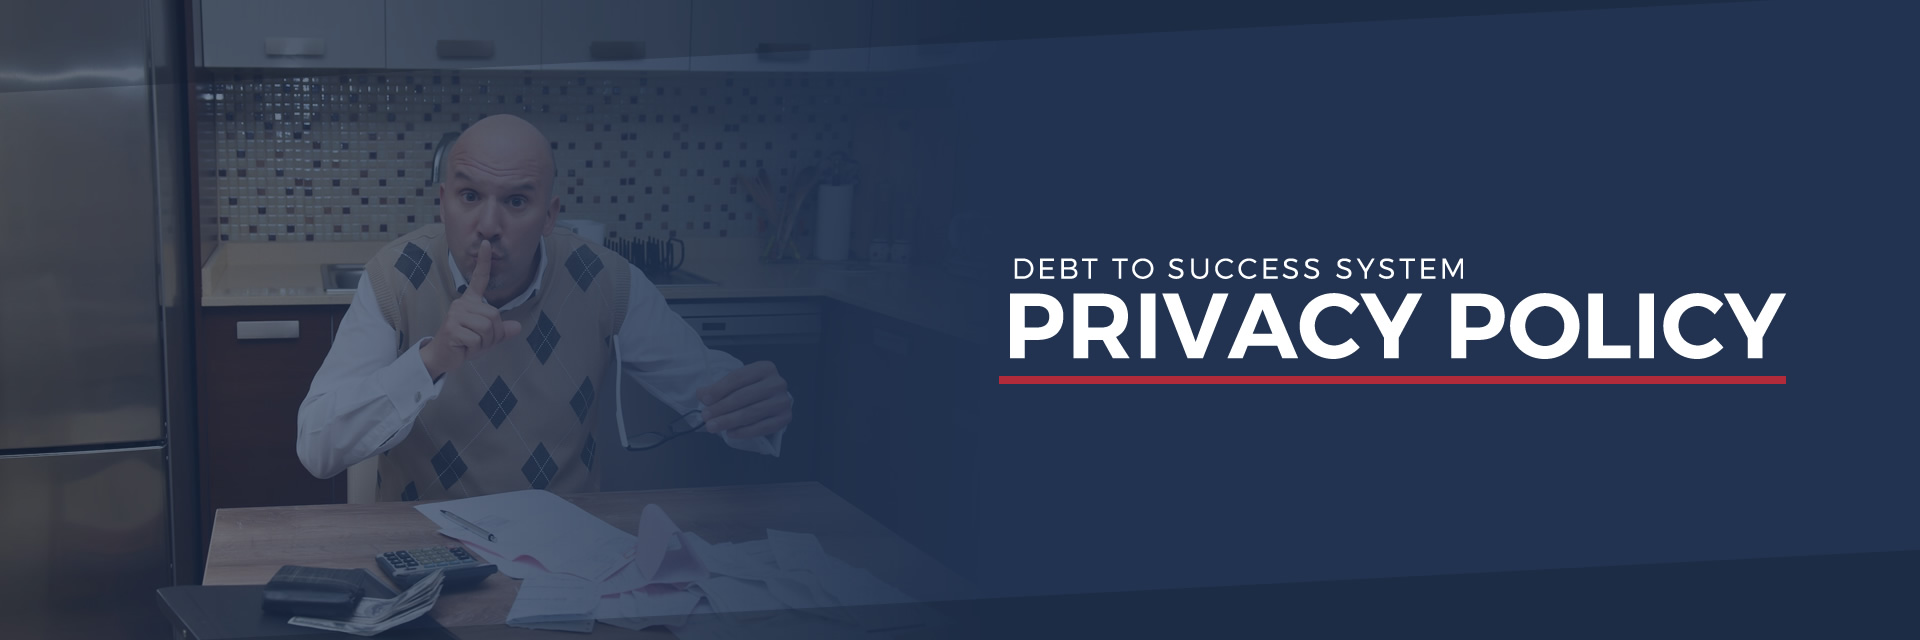 Debt to Success System - DTSS Privacy